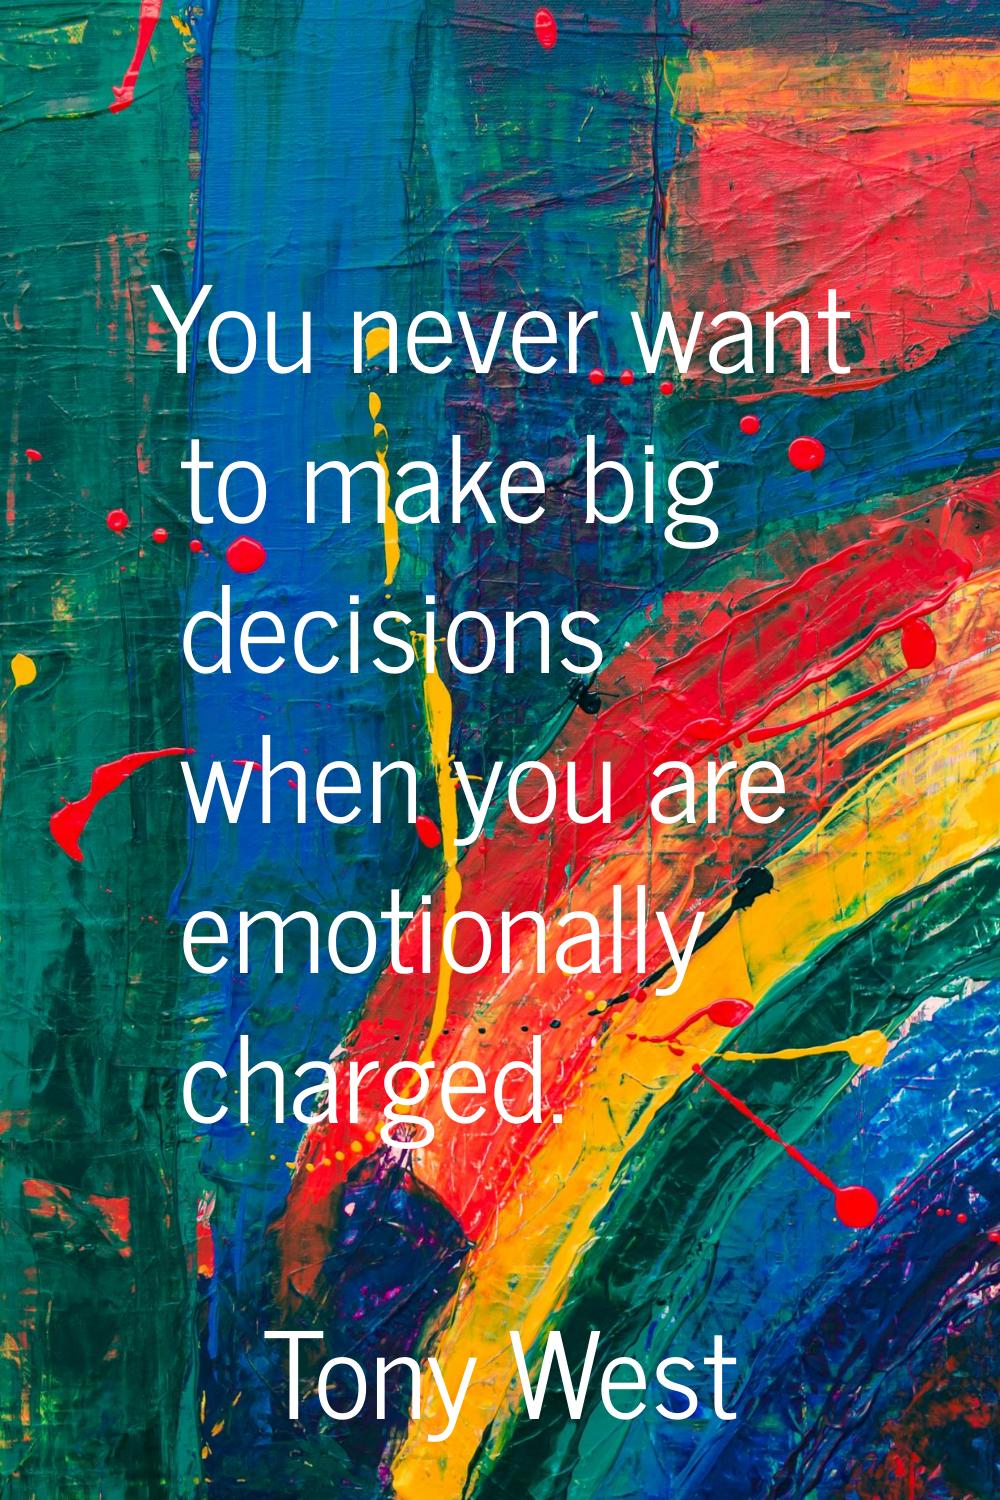 You never want to make big decisions when you are emotionally charged.